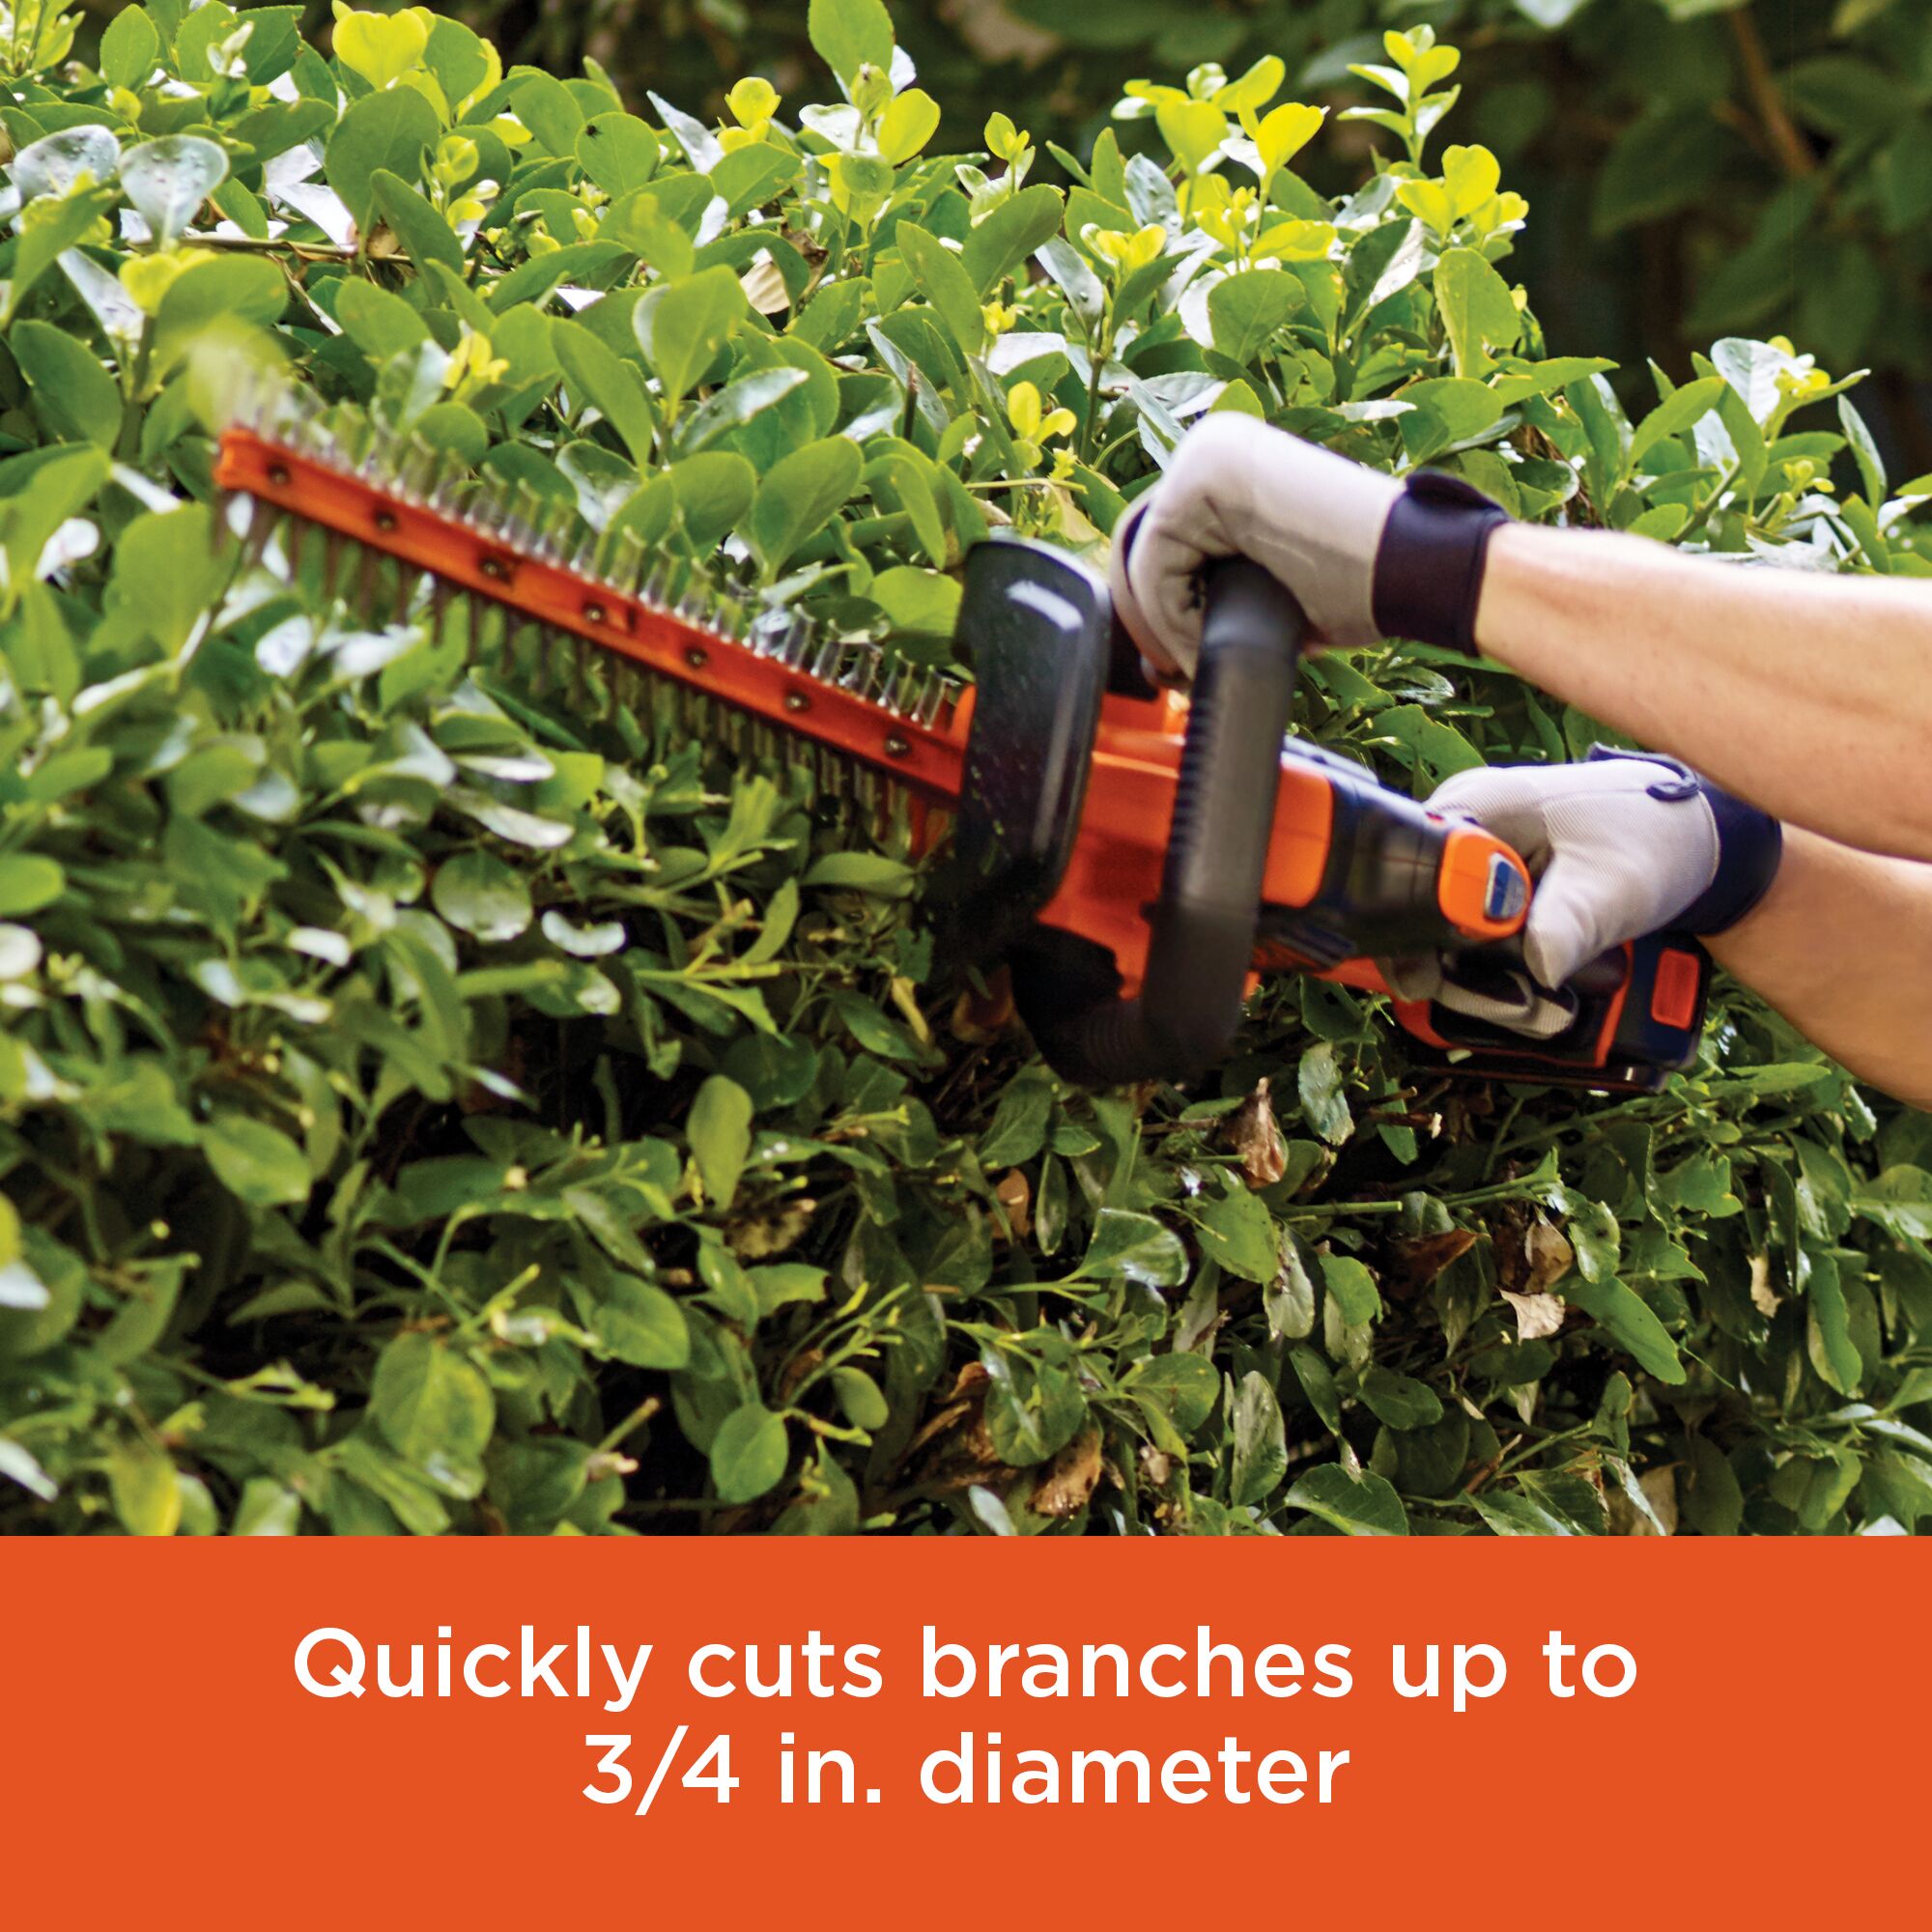 BLACK + DECKER PowerCut 22 In. 20V Lithium Ion Cordless Hedge Trimmer  LHT321, 1 - Fred Meyer